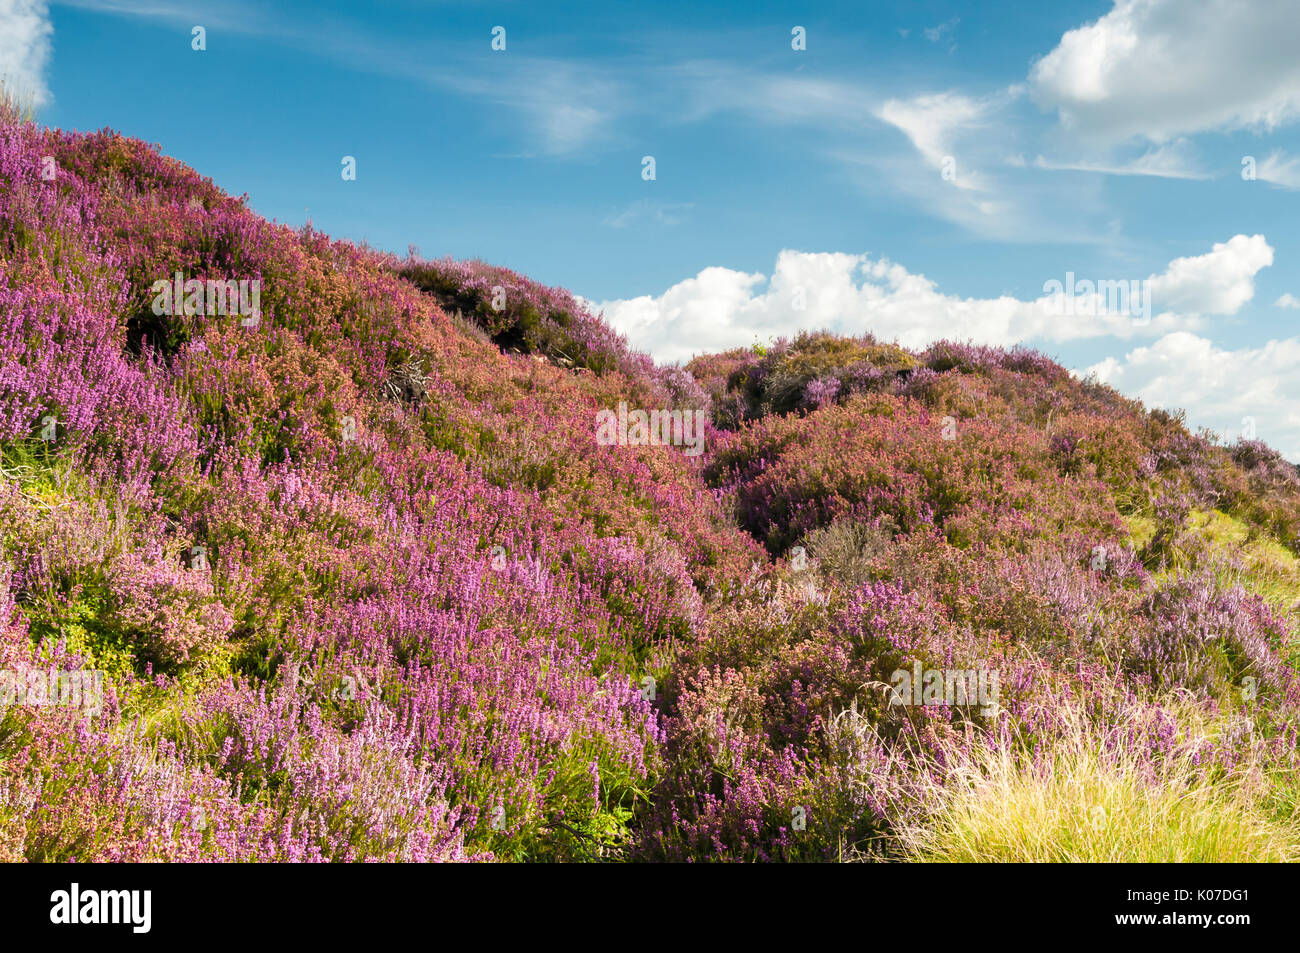 Common Heather, Ling or Heather blooming on the North York Moors, England Stock Photo